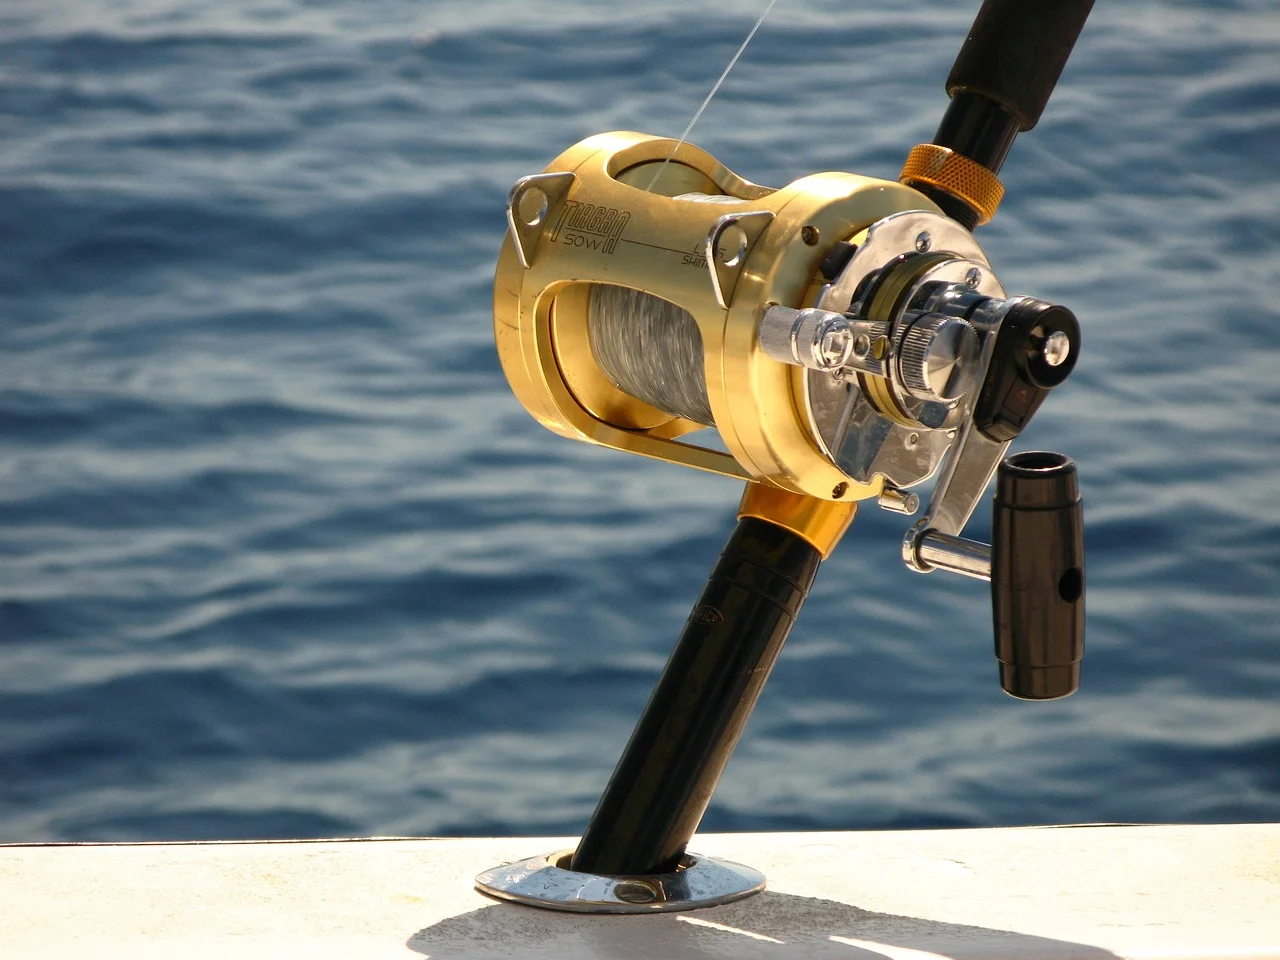 How to Catch Golden Tilefish off South Florida